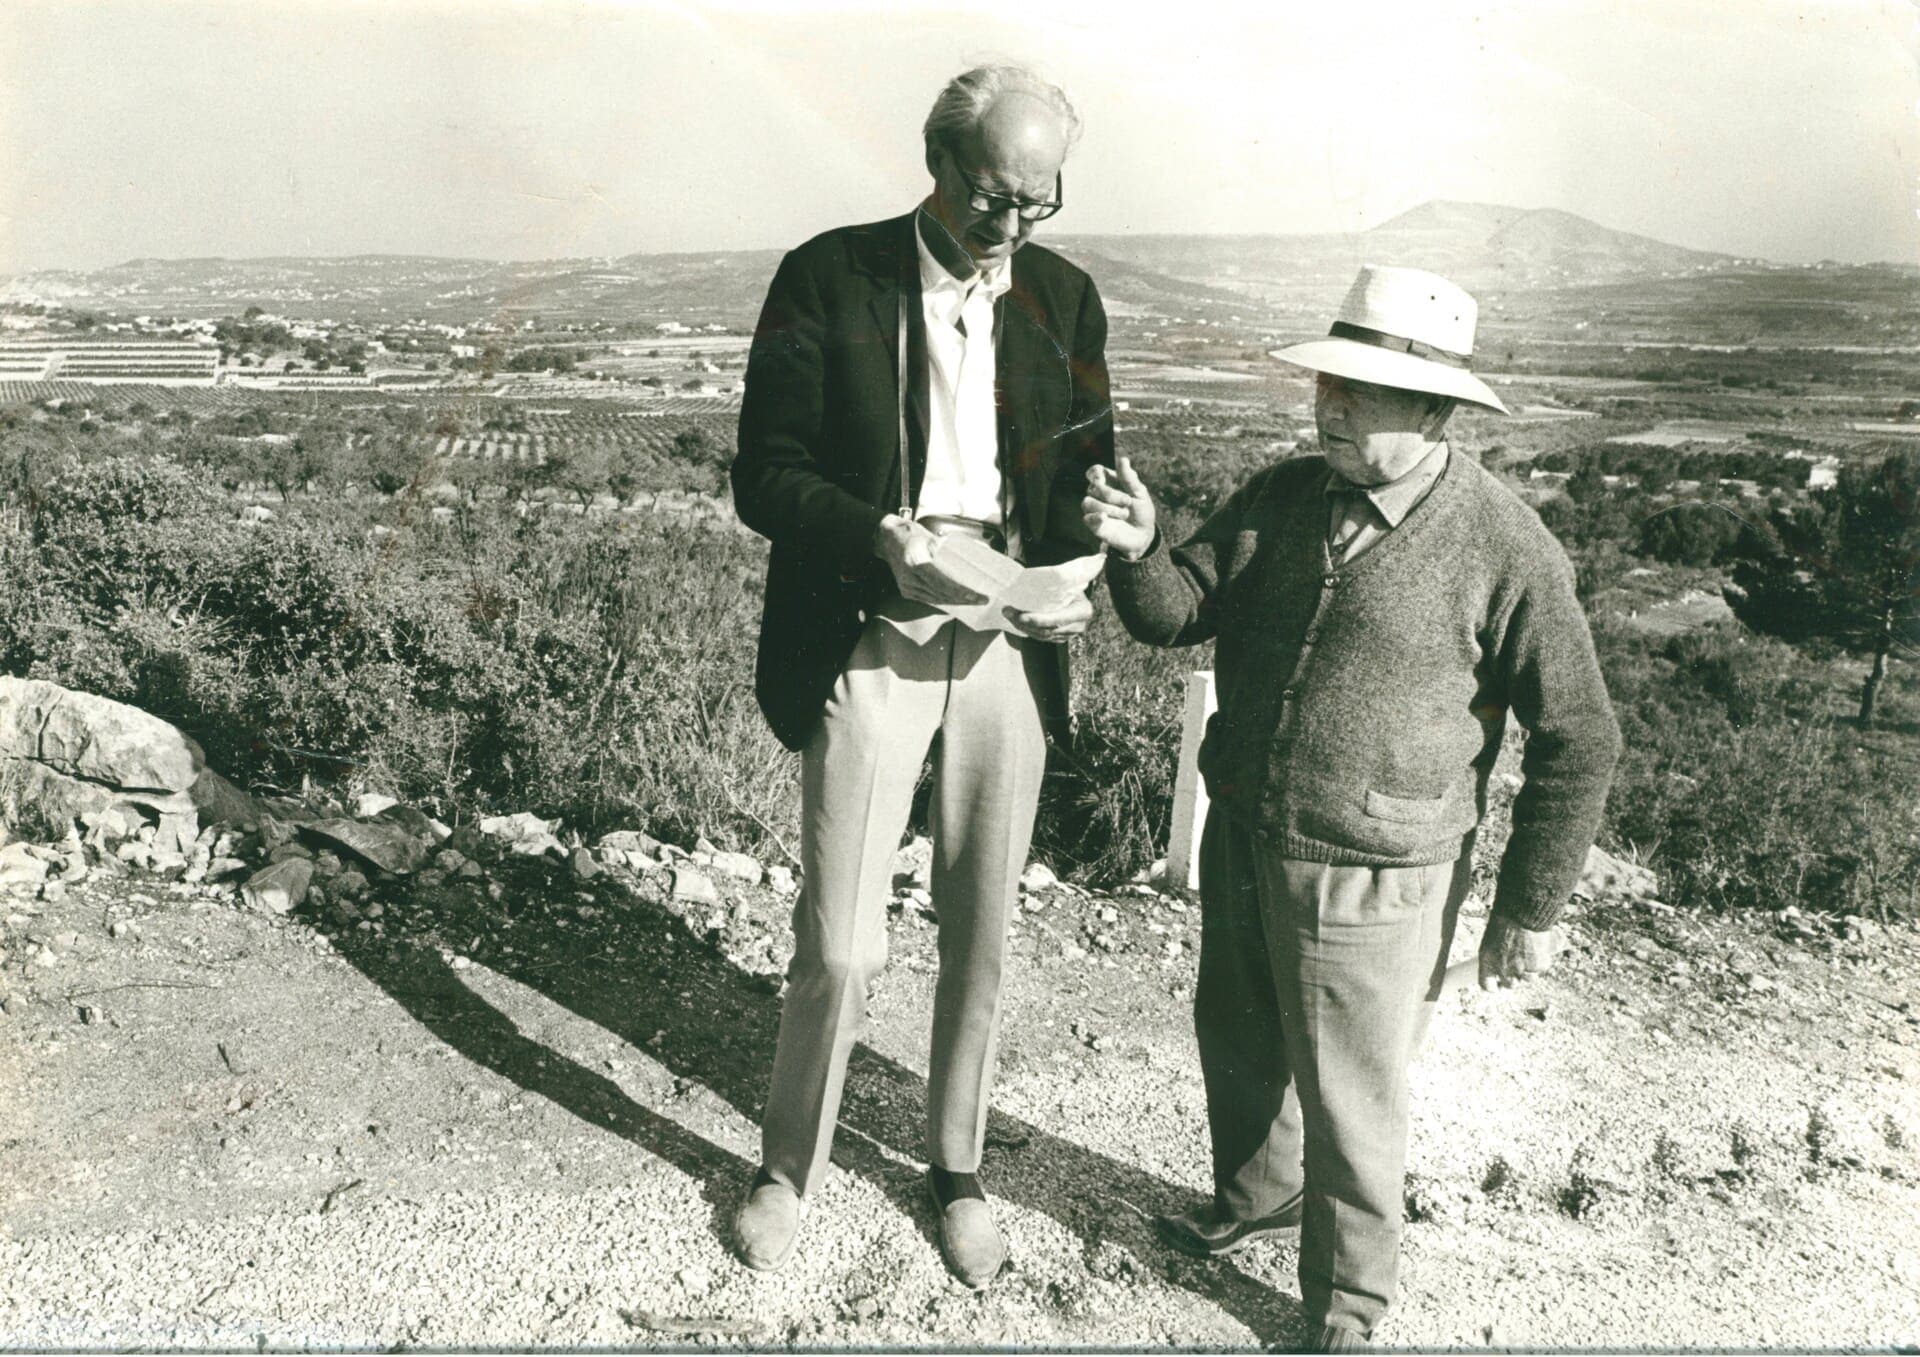 Mr. José Ribes Bas Sr. with Mr. Ove Hermanssen inspecting the plots in the Rimontgó urbanisation in 1964.